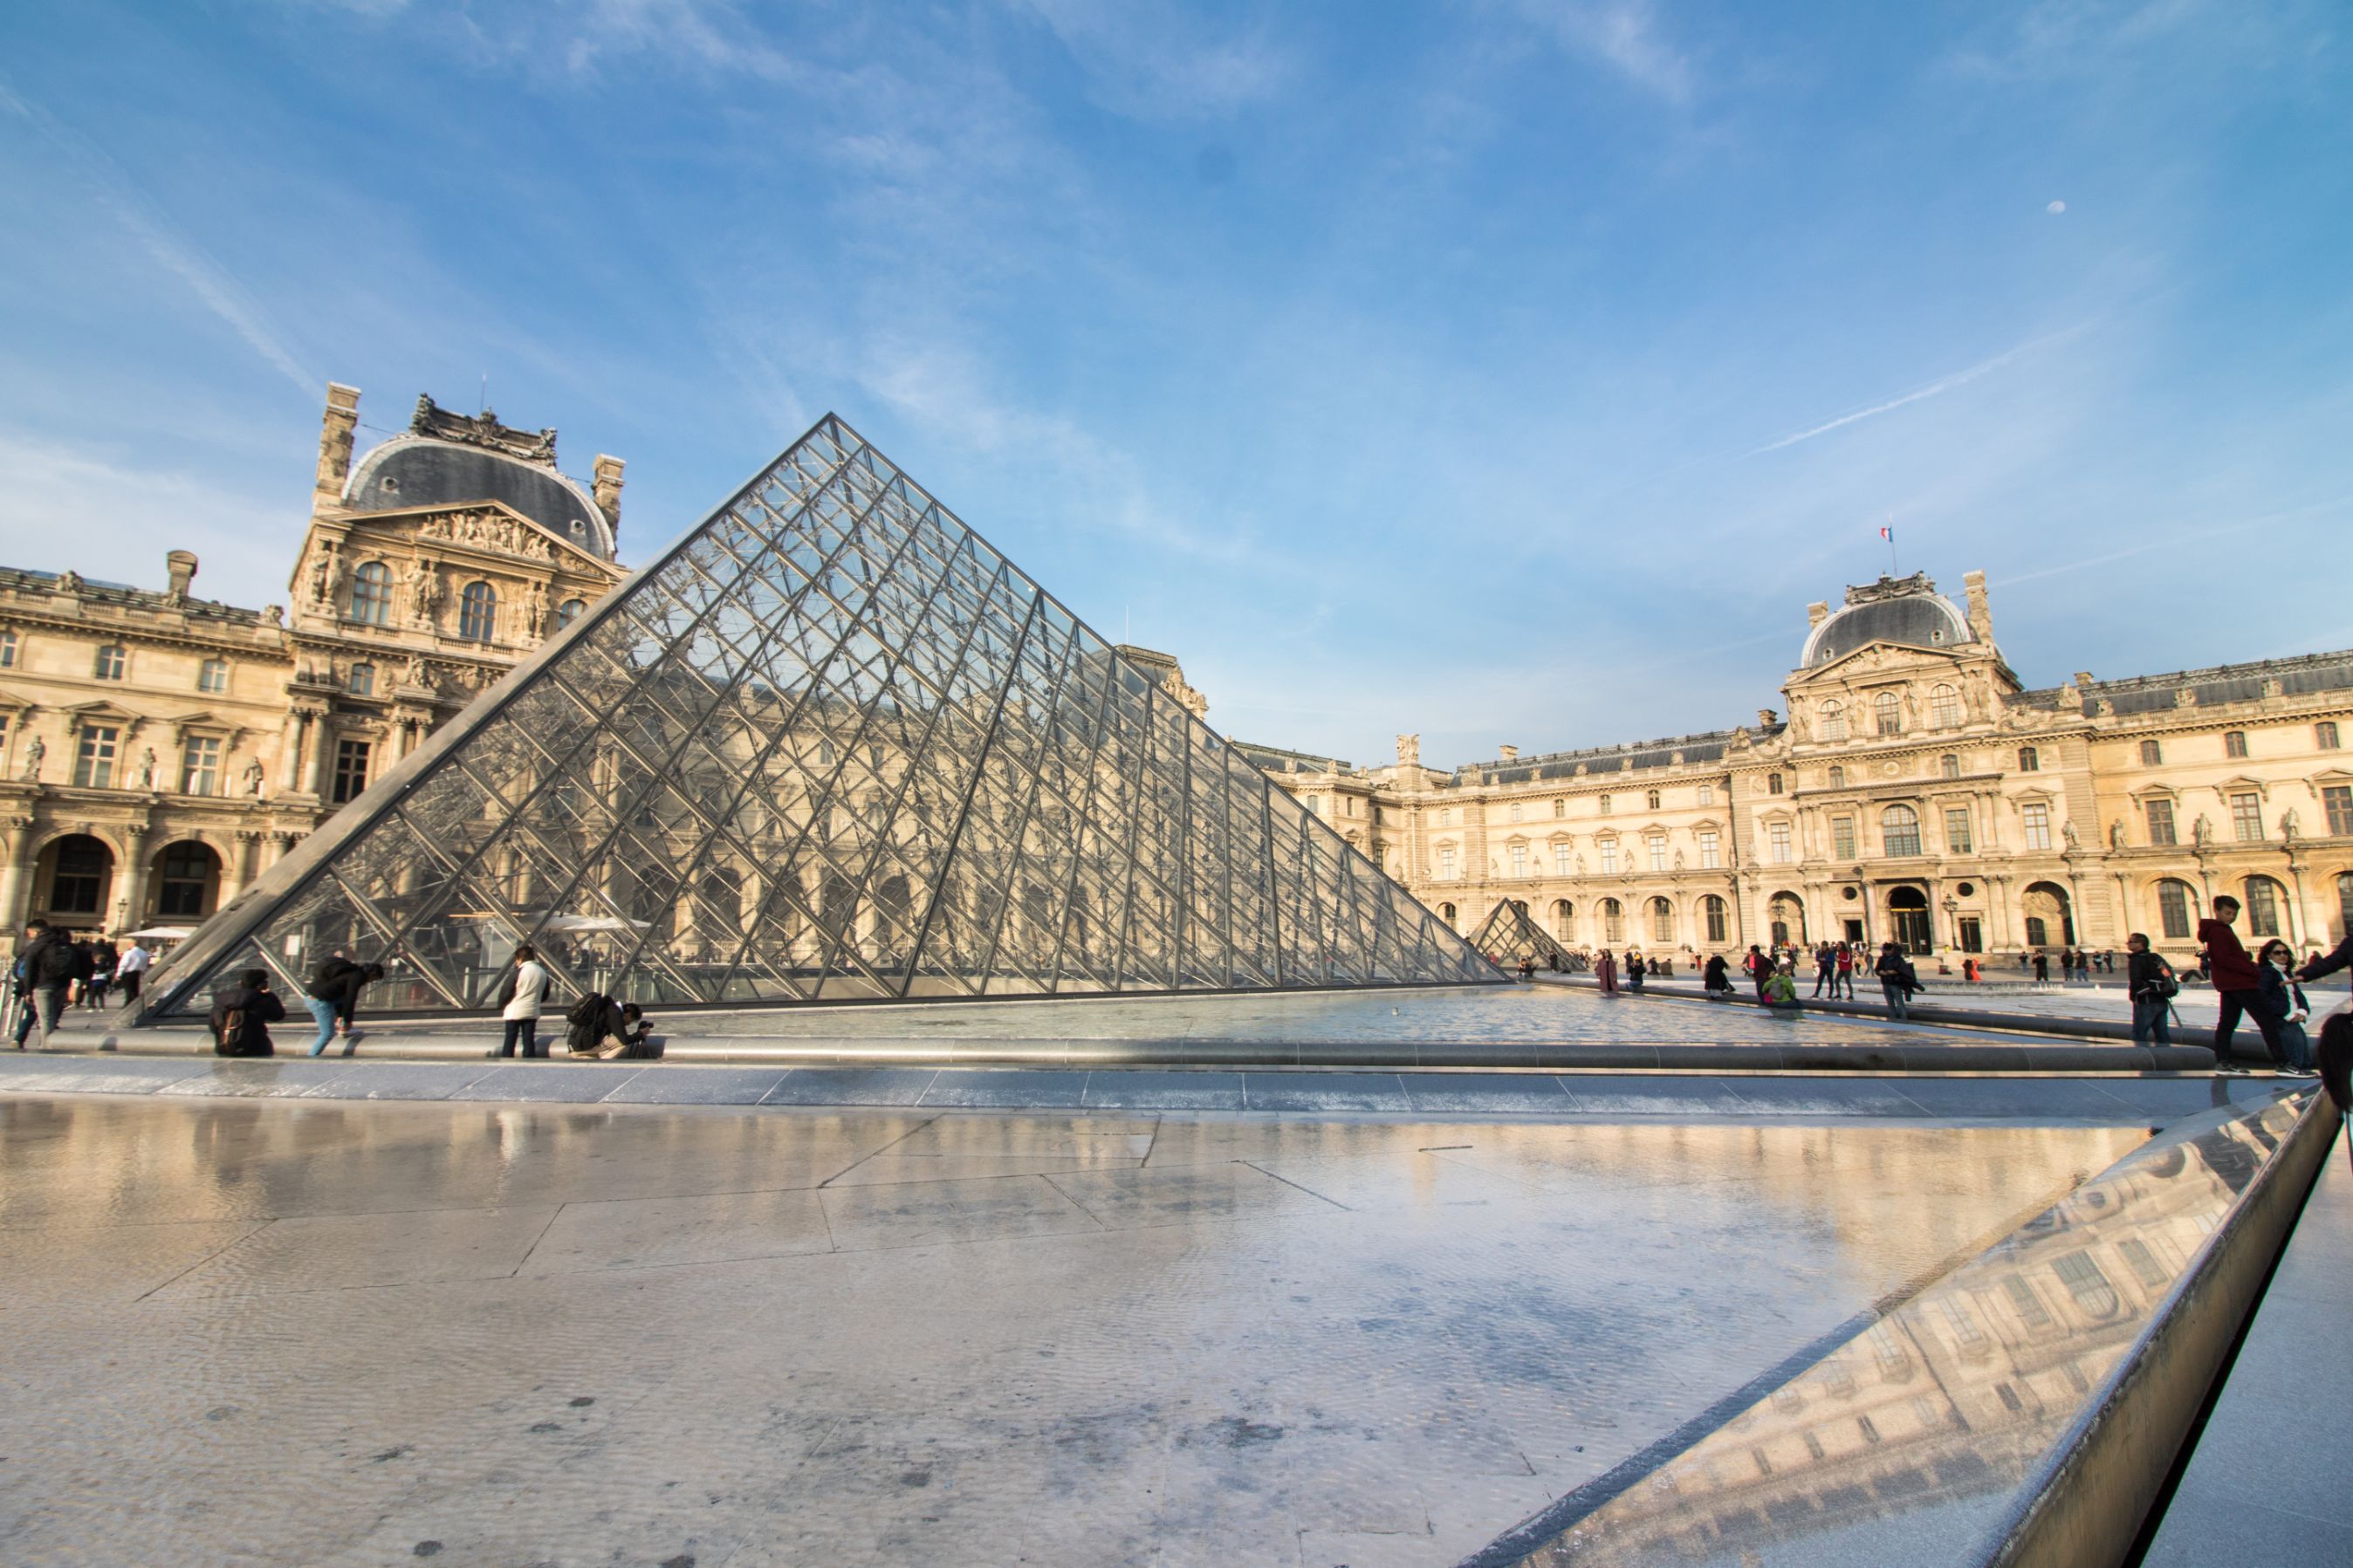 Louvre Museum and Art Gallery Paris. Glass pyramid in square with historic buildings and blue skies in background. Fountains in foreground.